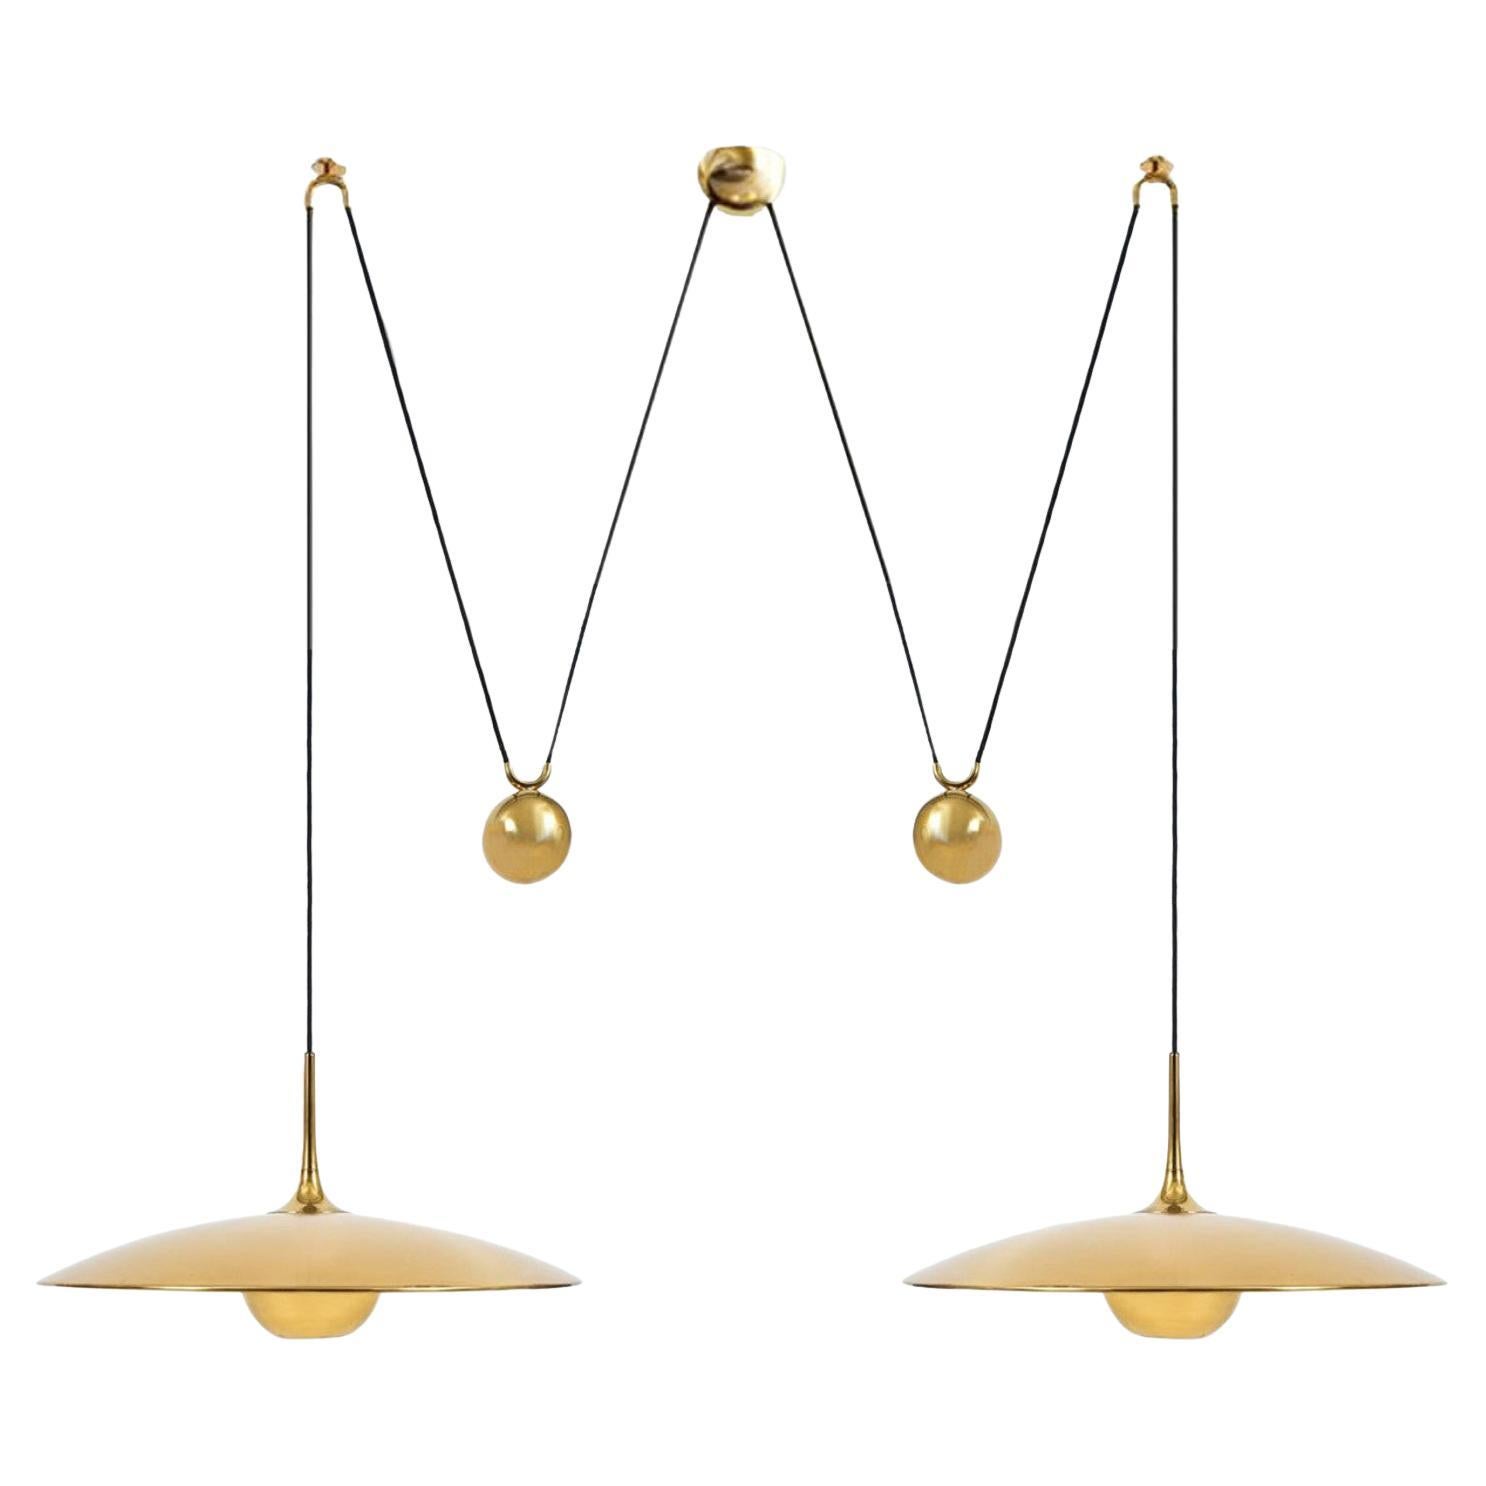 Onos 55 Double Pull Brass Pendant Lamp by Florian Schulz